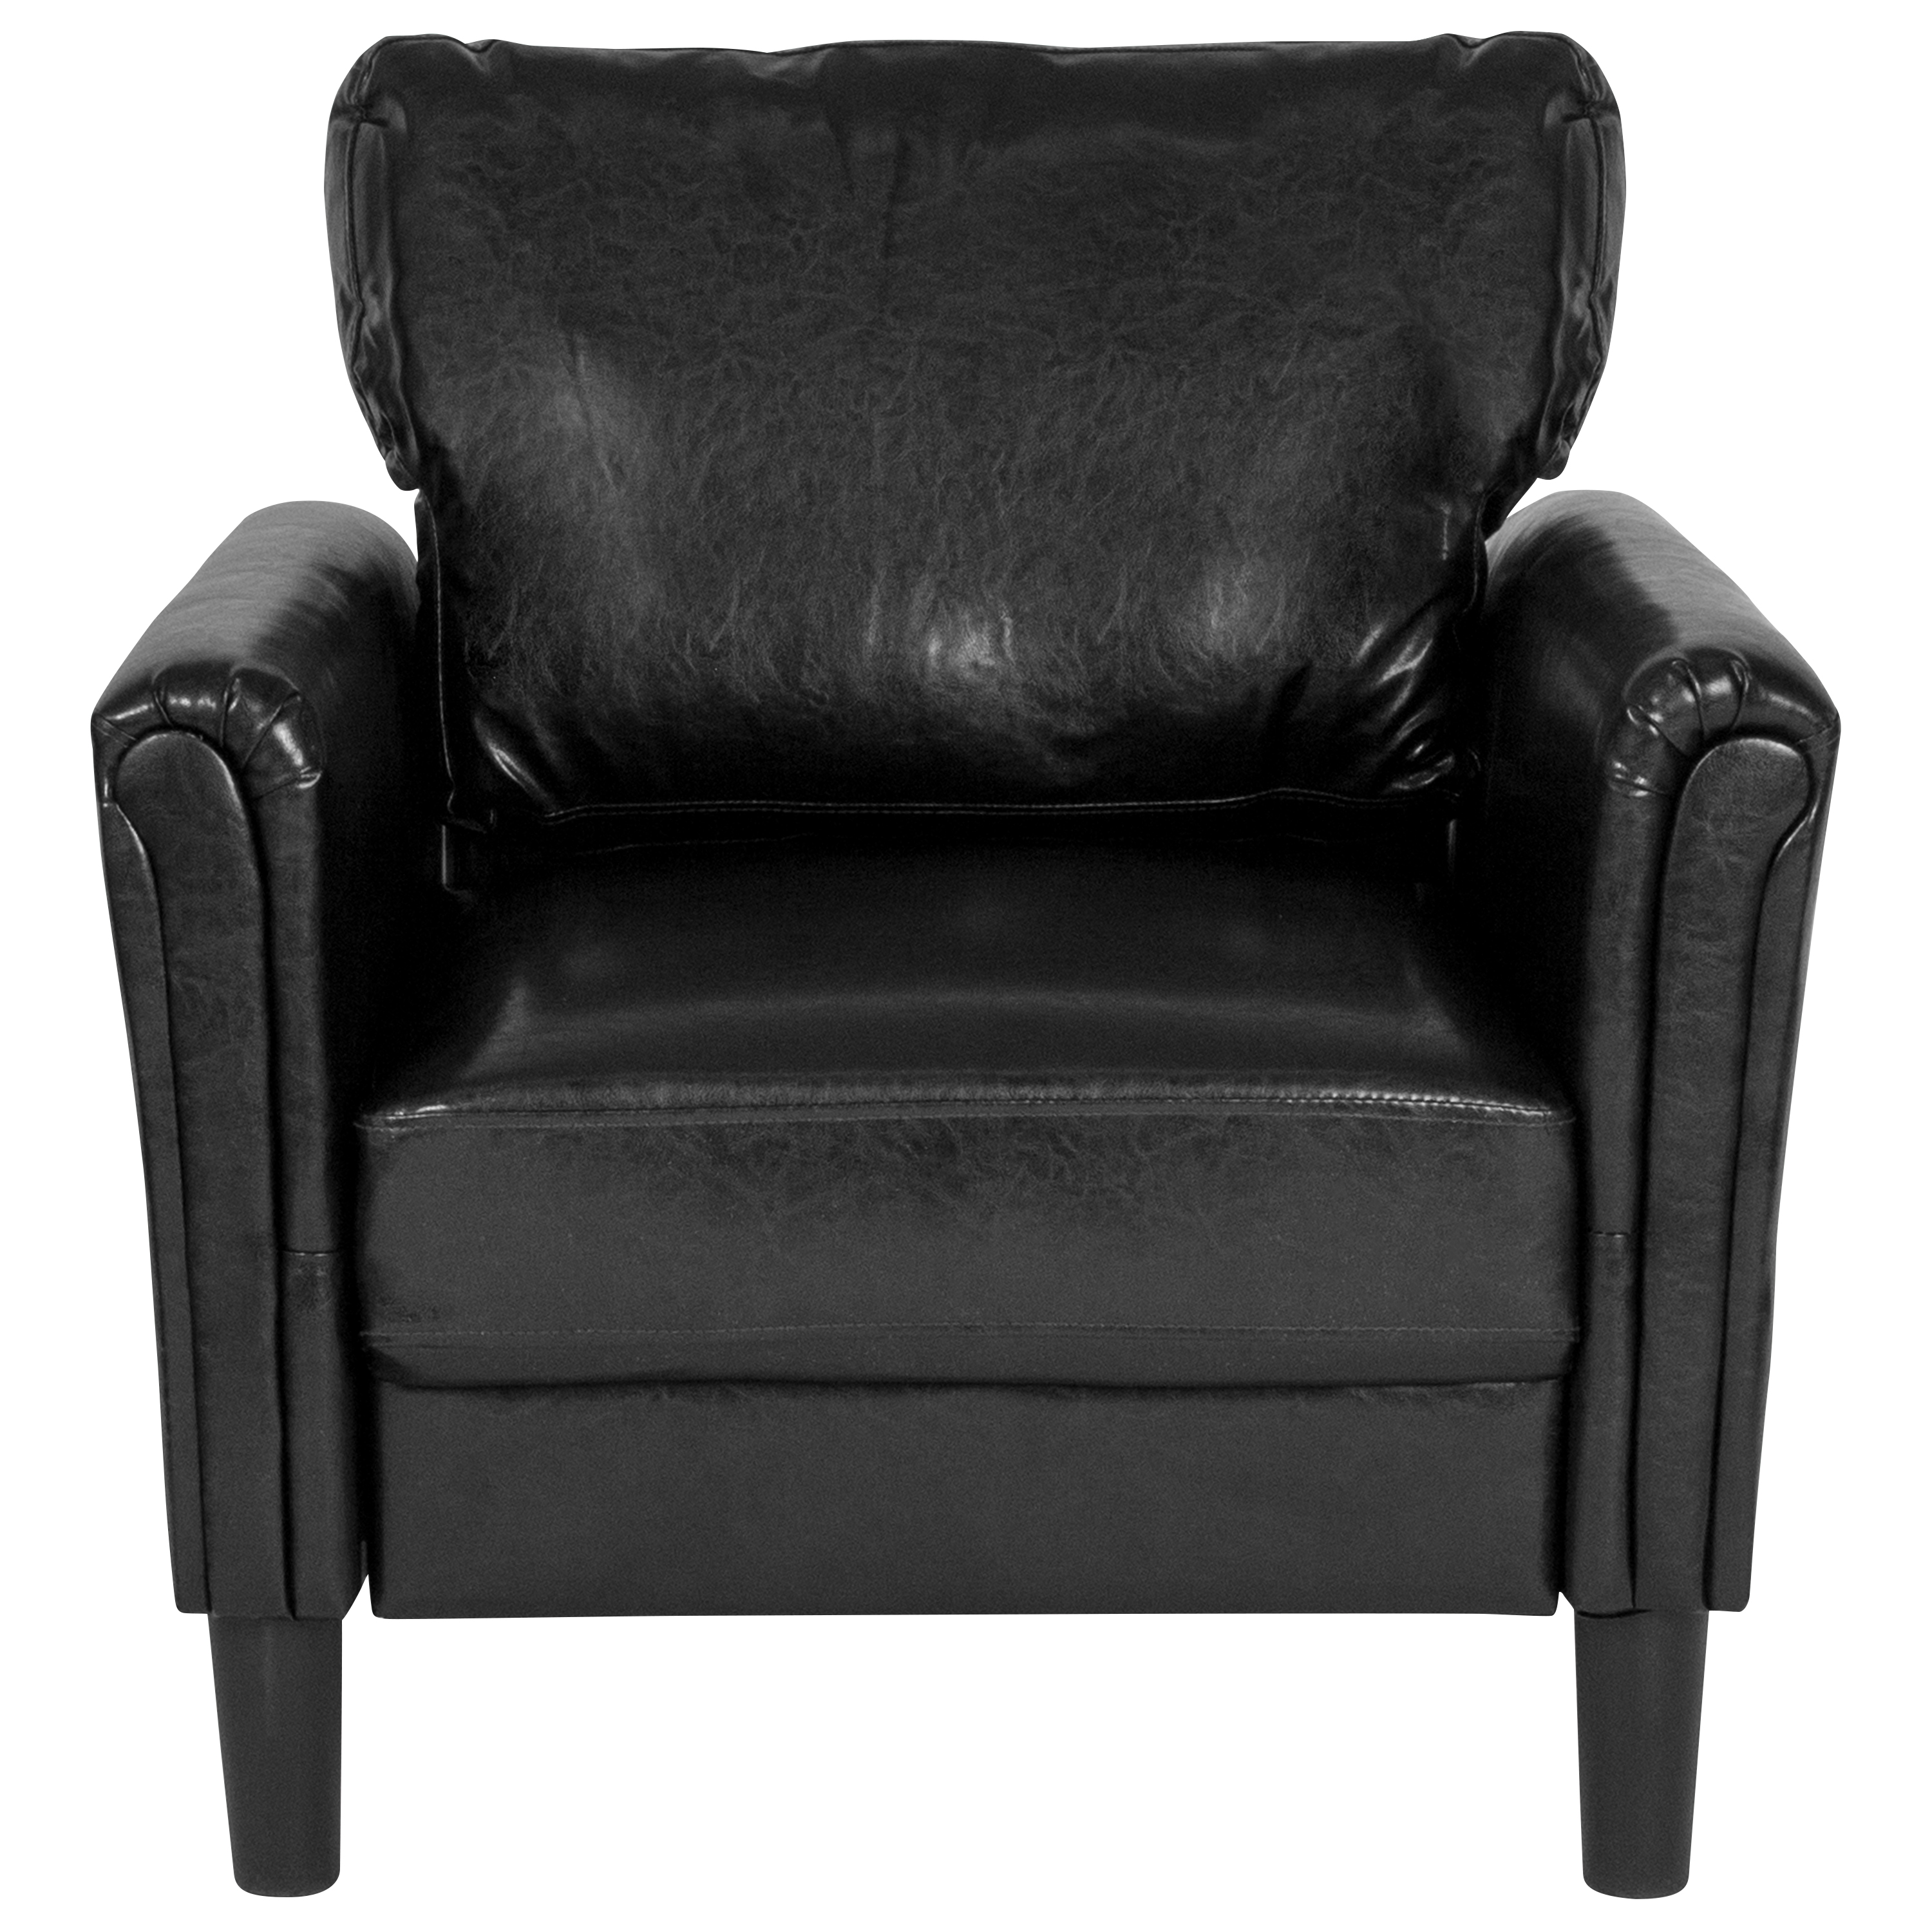 Flash Furniture Bari Upholstered Chair in Black LeatherSoft - image 5 of 5